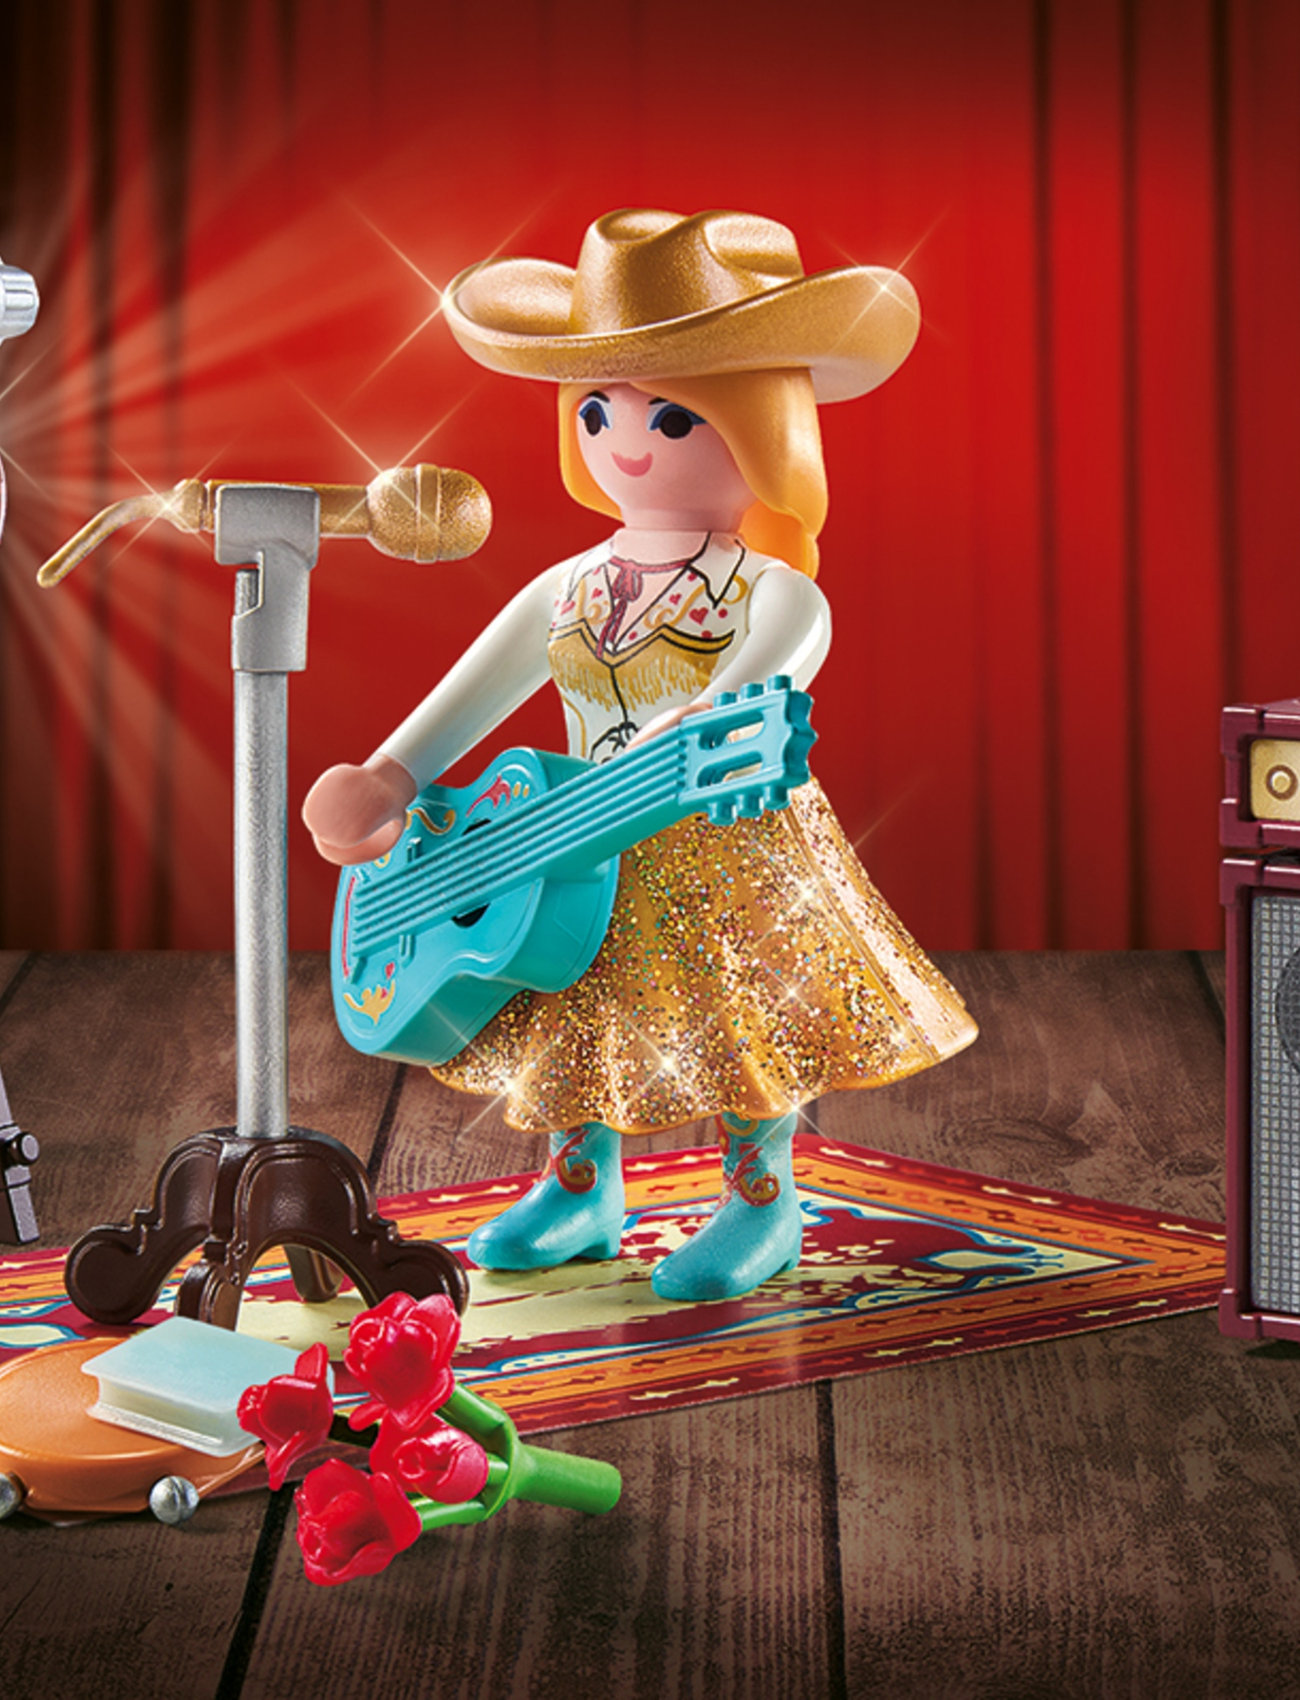 PLAYMOBIL - PLAYMOBIL Gift Sets Country Singer Gift Set - 71184 - playmobil family fun - multicolored - 1